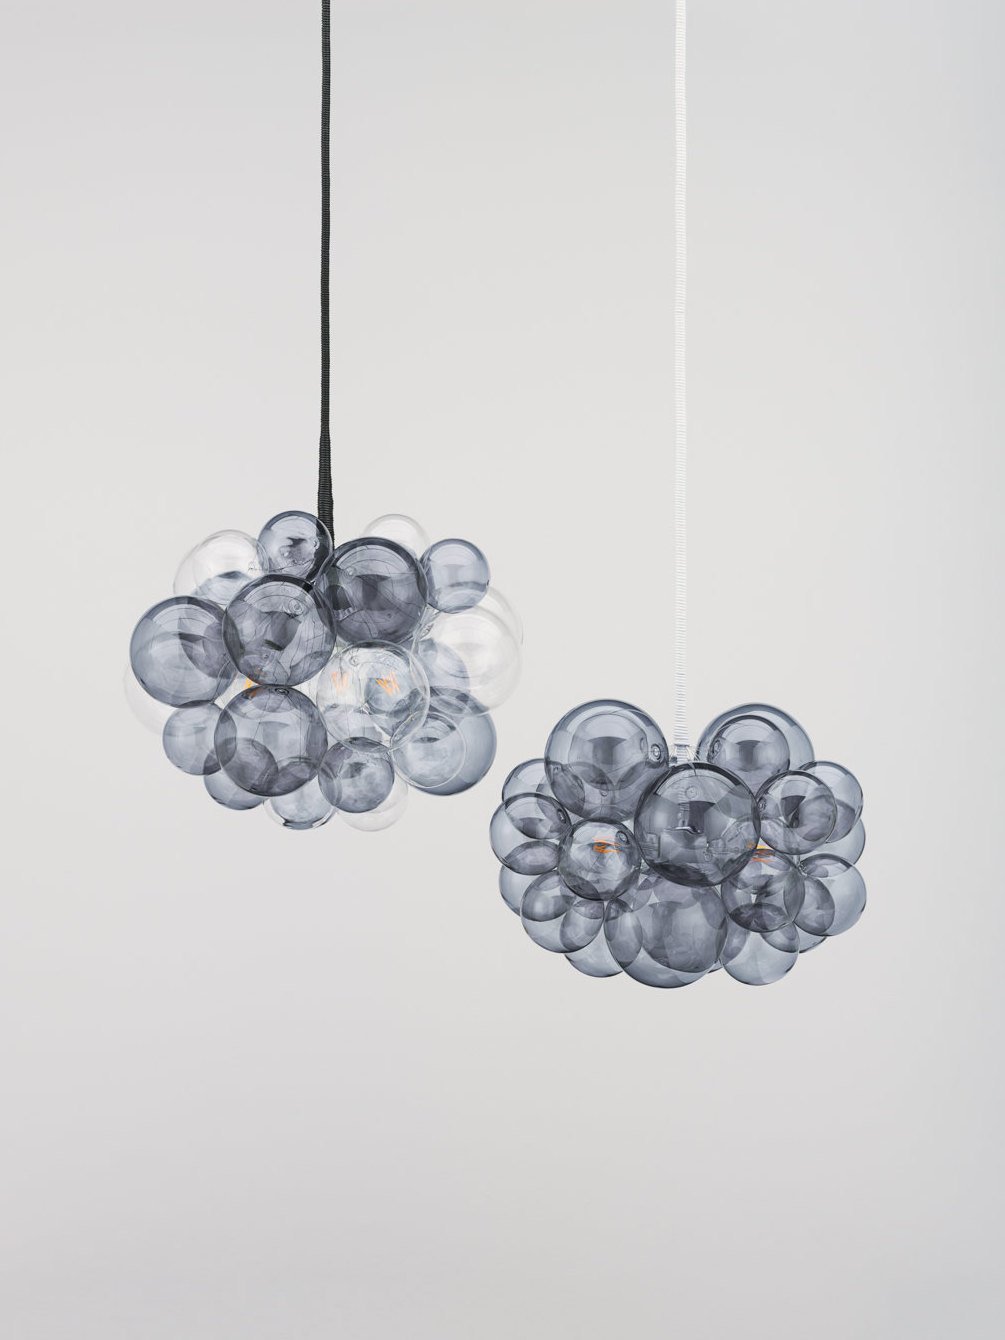 The 31 Glass Bubble Chandelier in Smoke &amp; Clear